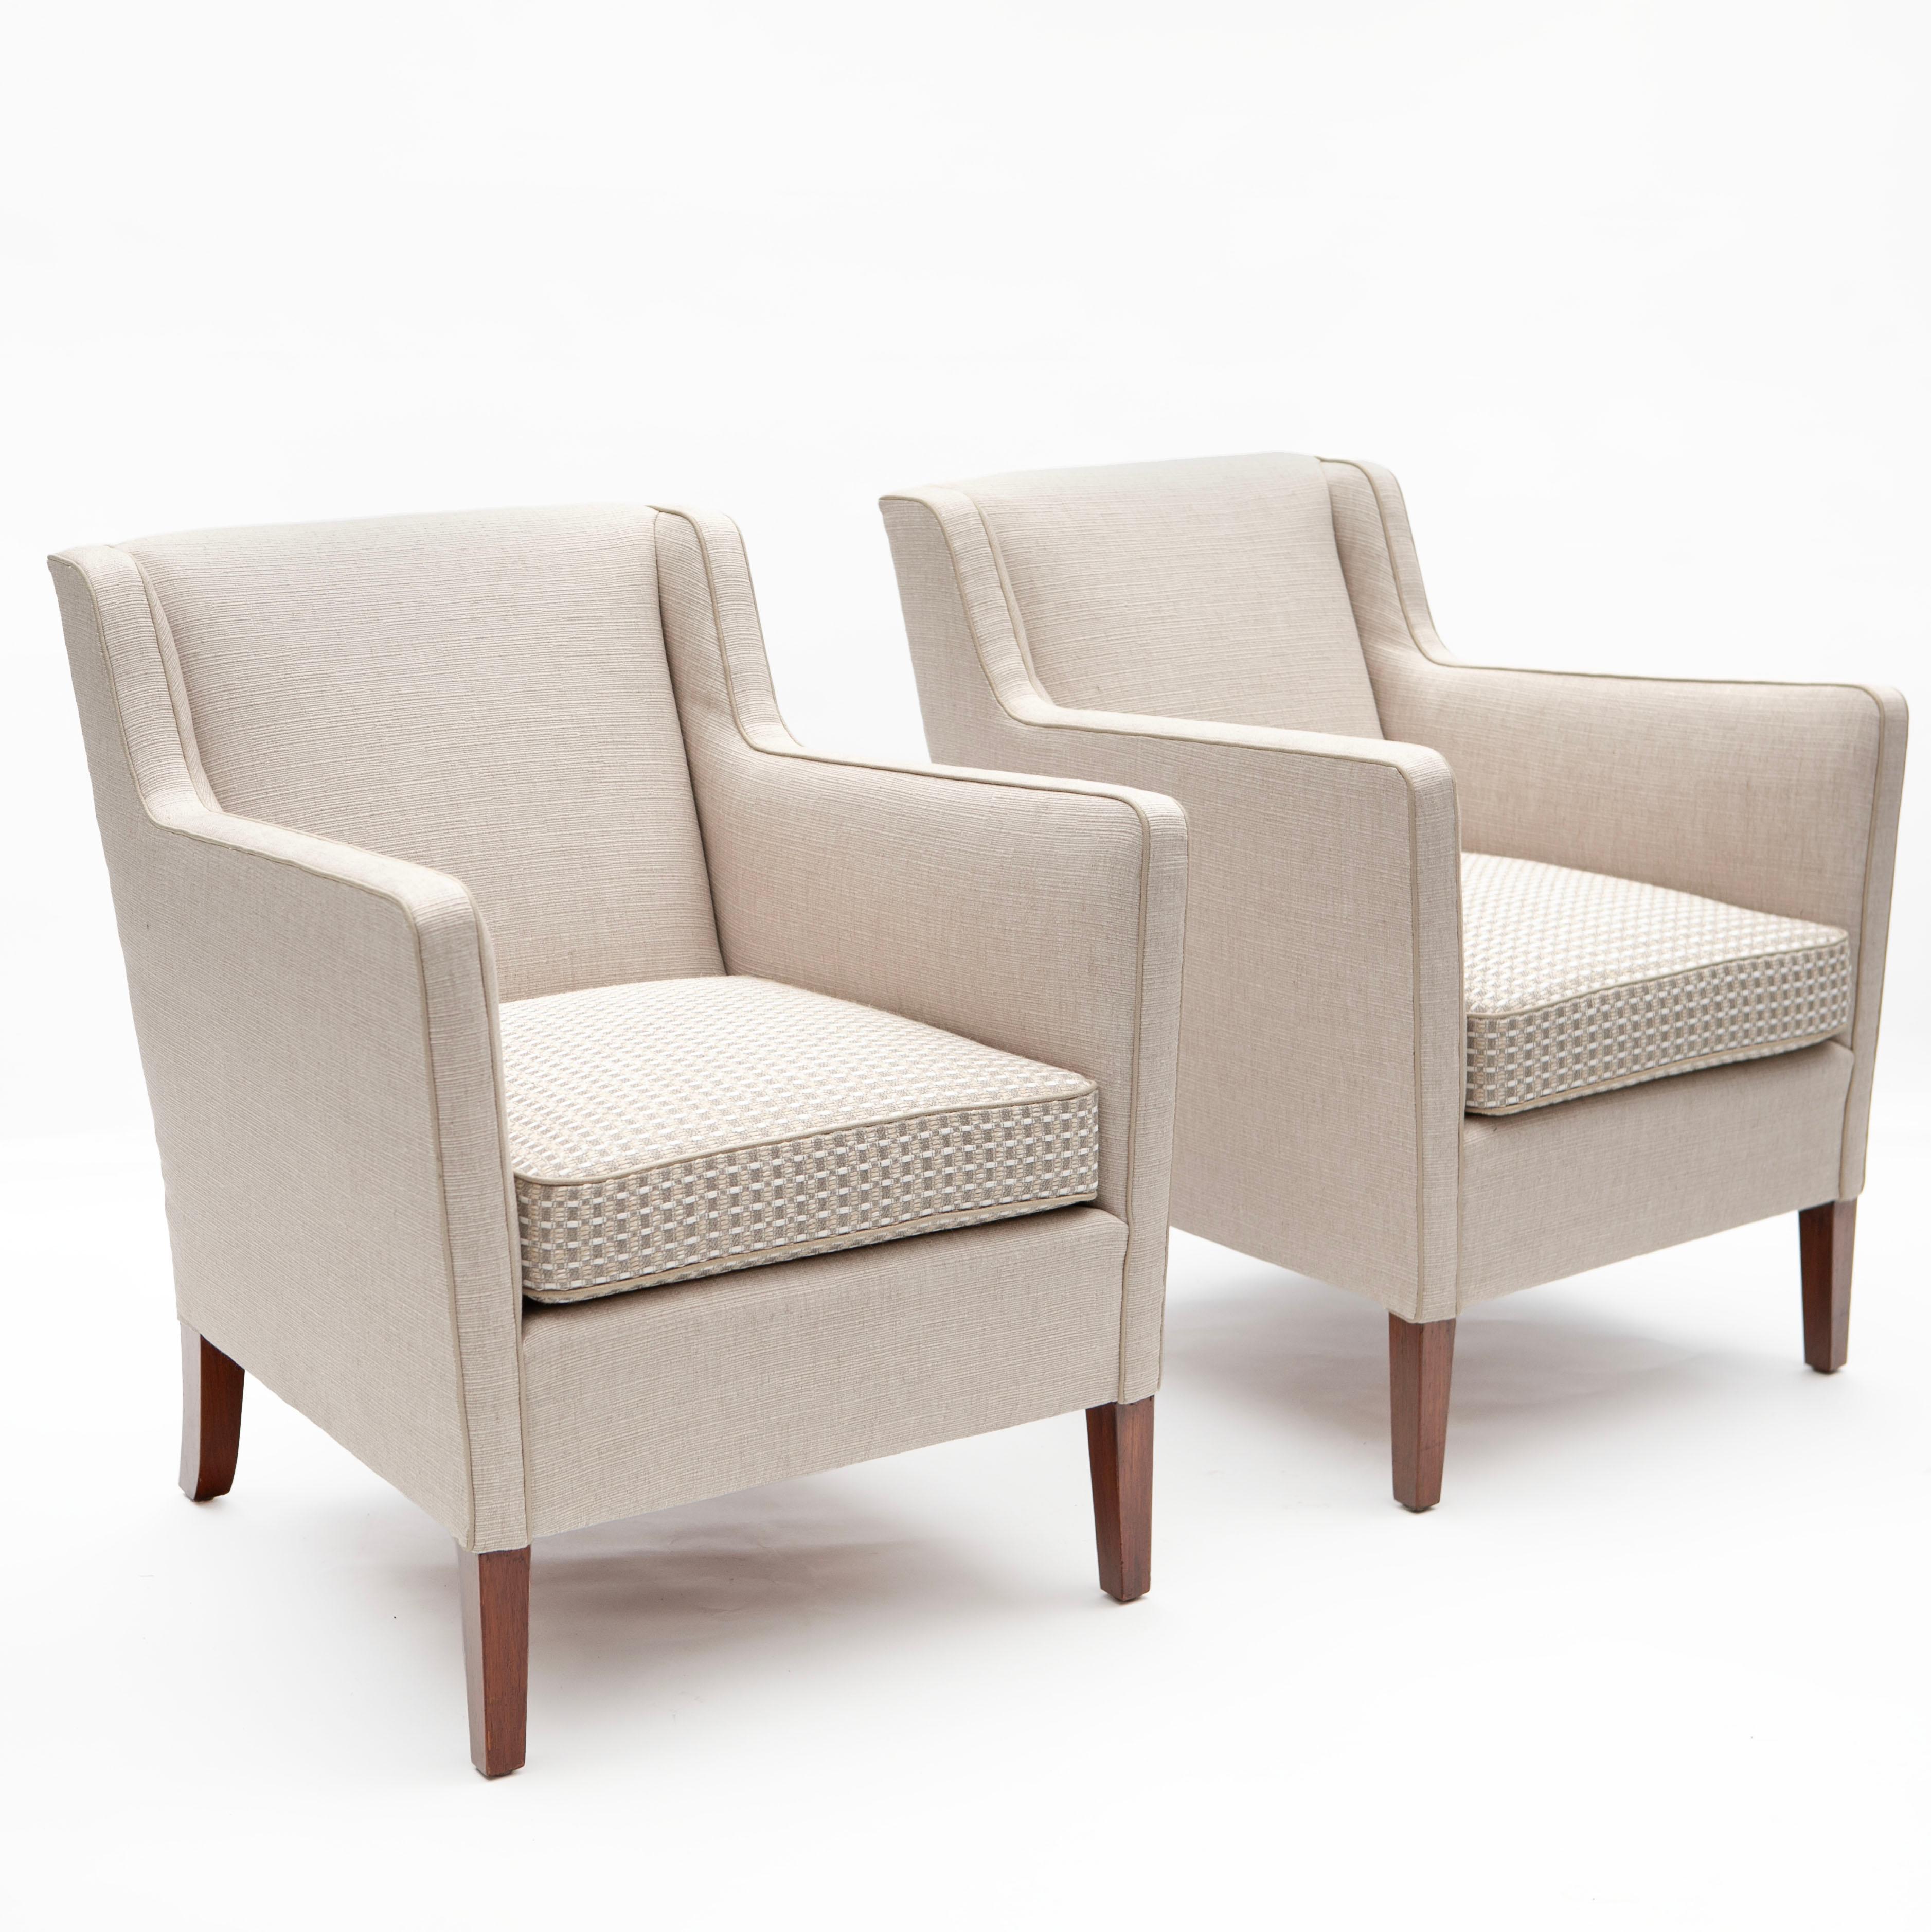 Pair of lounge chairs, designed and crafted by Frits Henningsen.

Newly upholstered with light sand colored textile from Larsen, featuring a upholstered cushion with check pattern , these chairs stand on tapered mahogany legs.

Denmark, 1950s
Sold